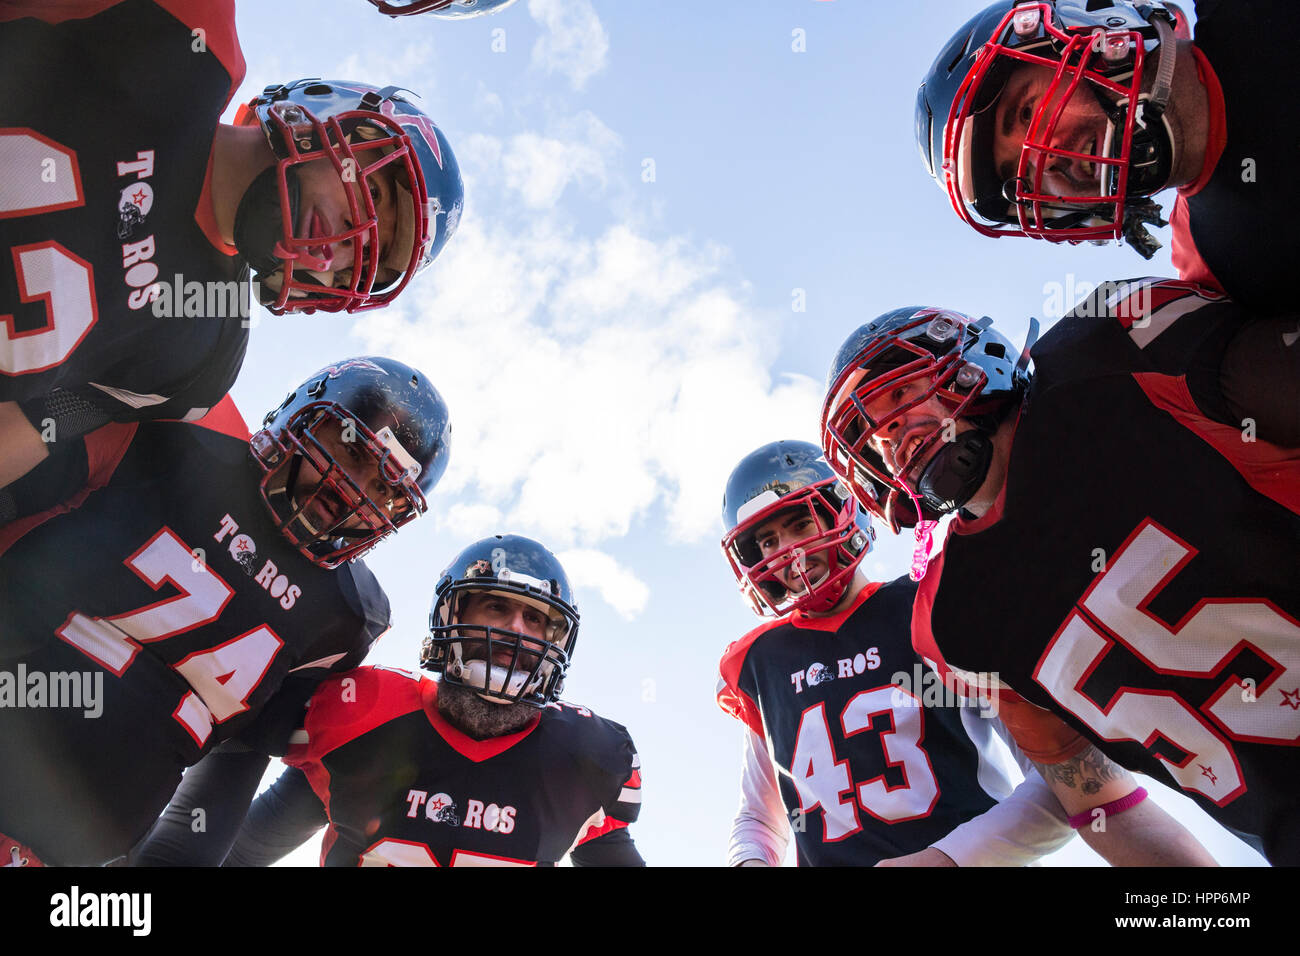 American football players in a huddle Stock Photo